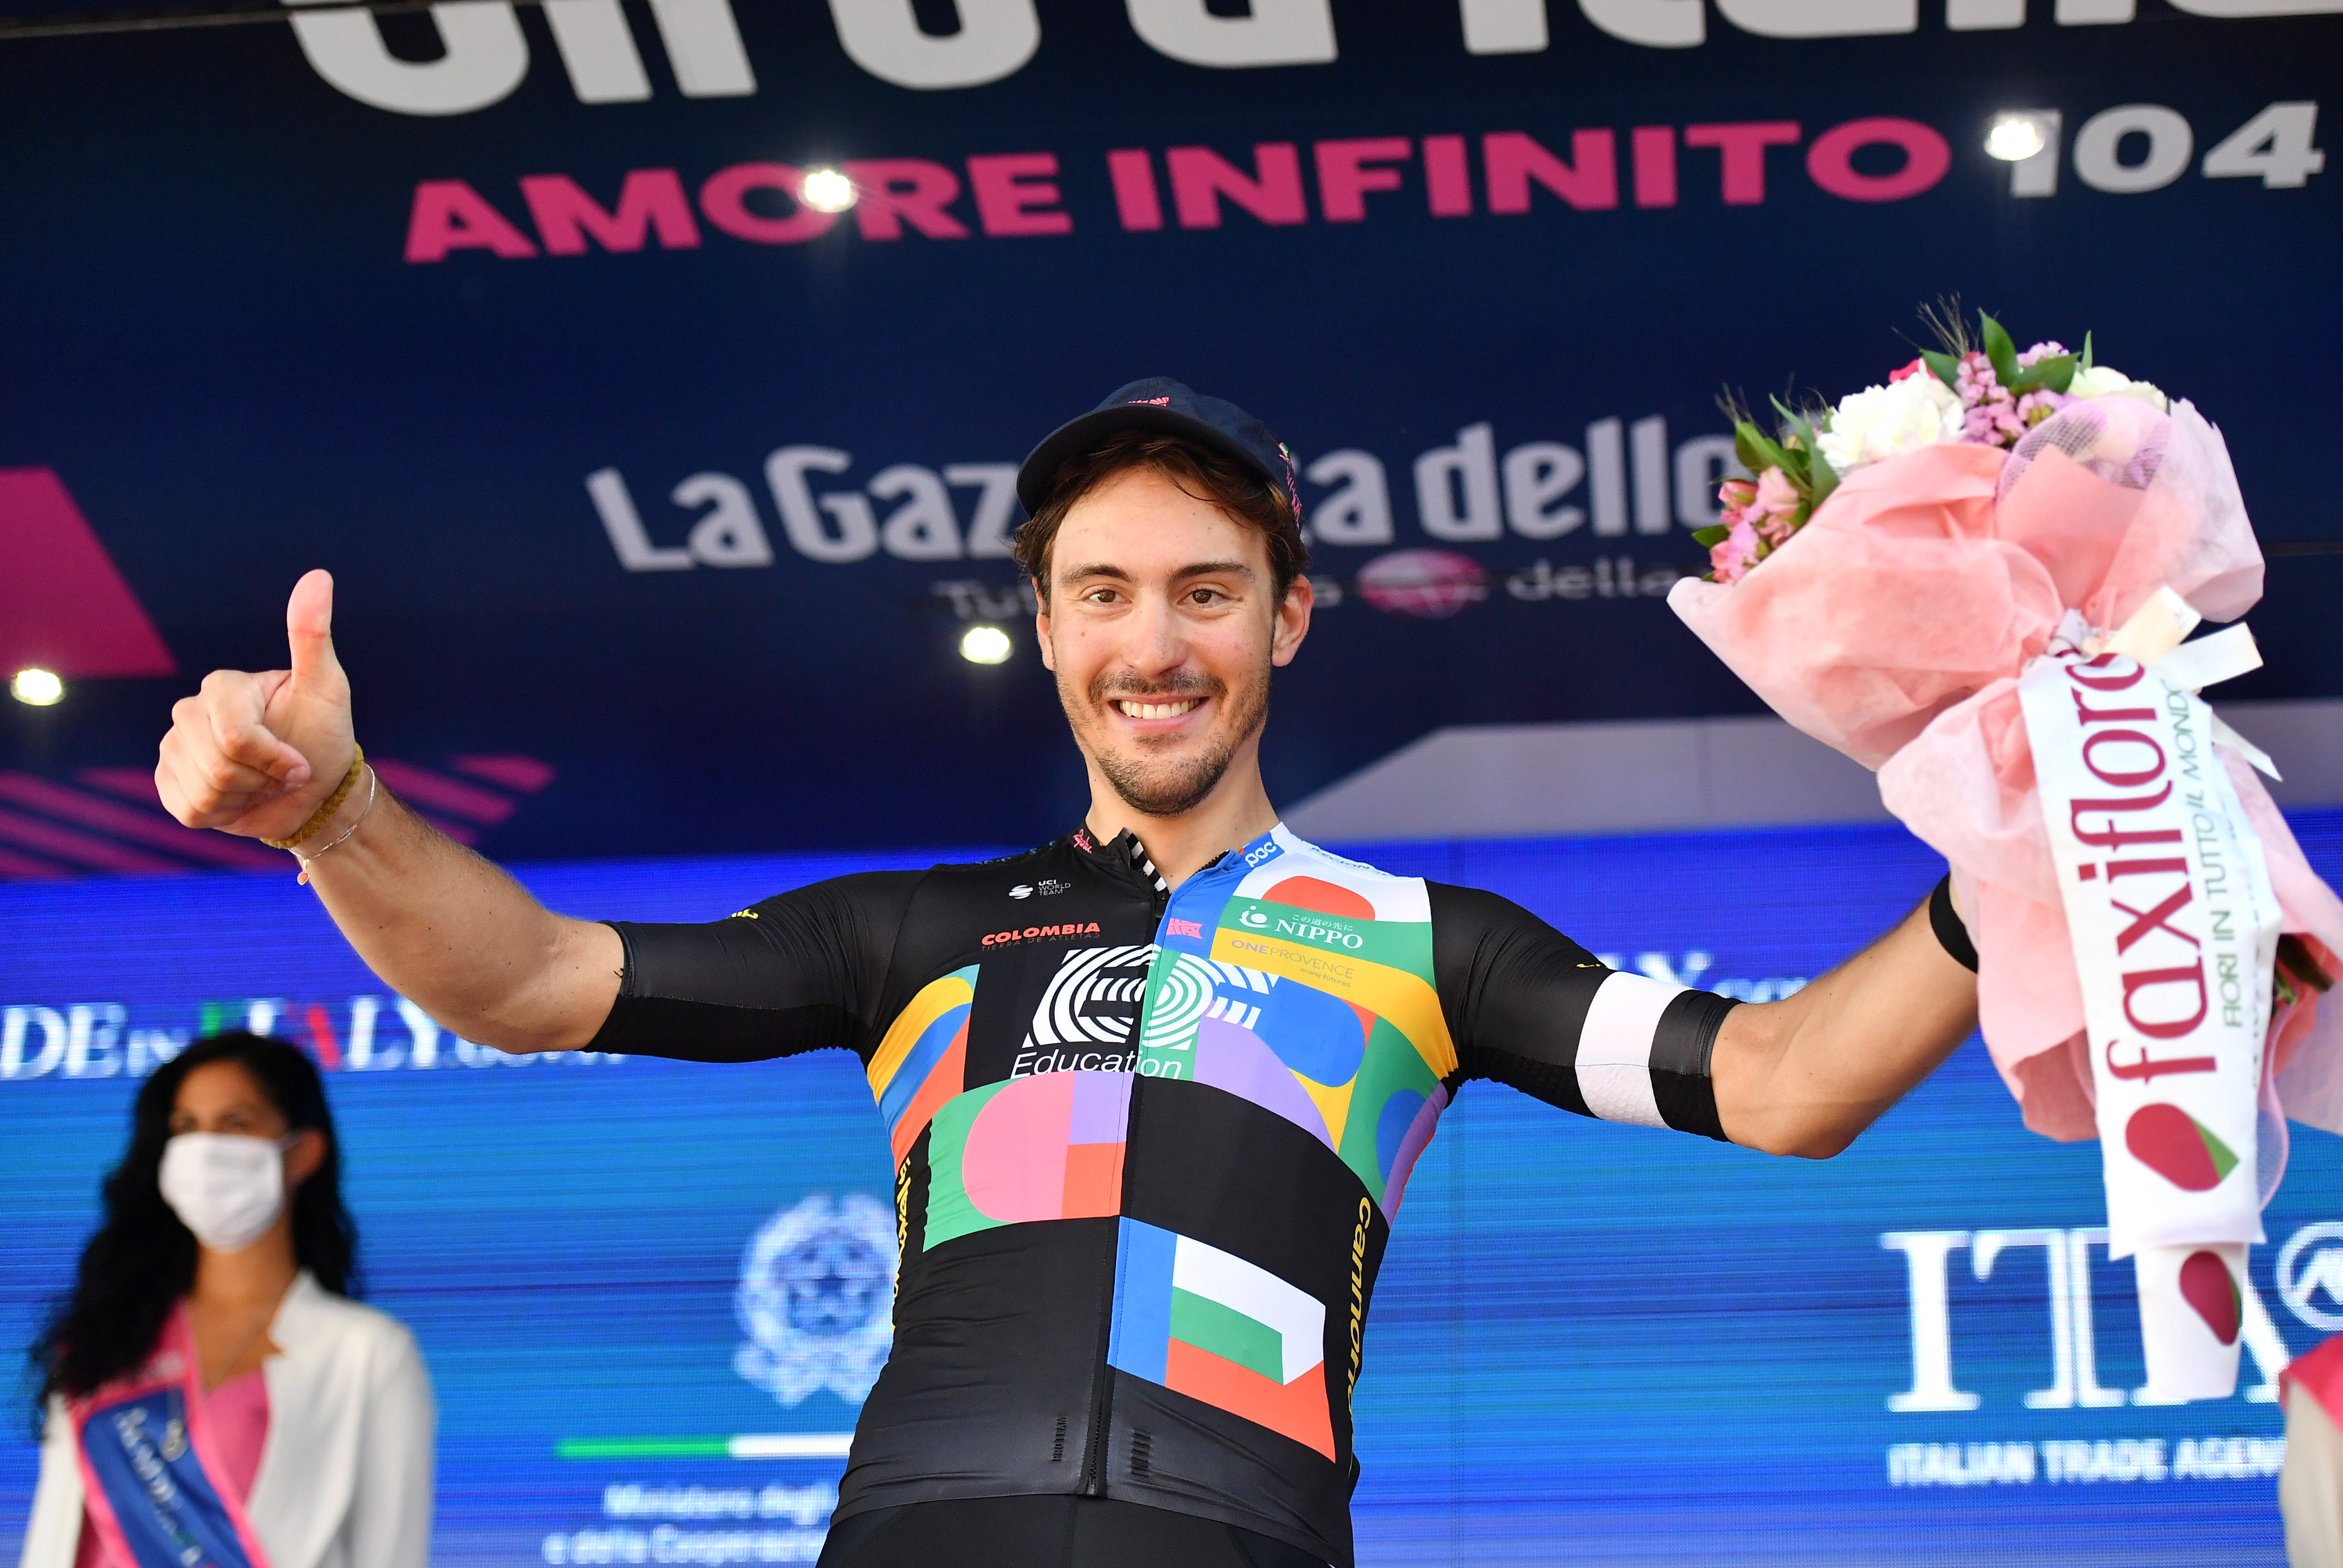 Bettiol rides to solo victory on longest Giro stage, Bernal retains ...